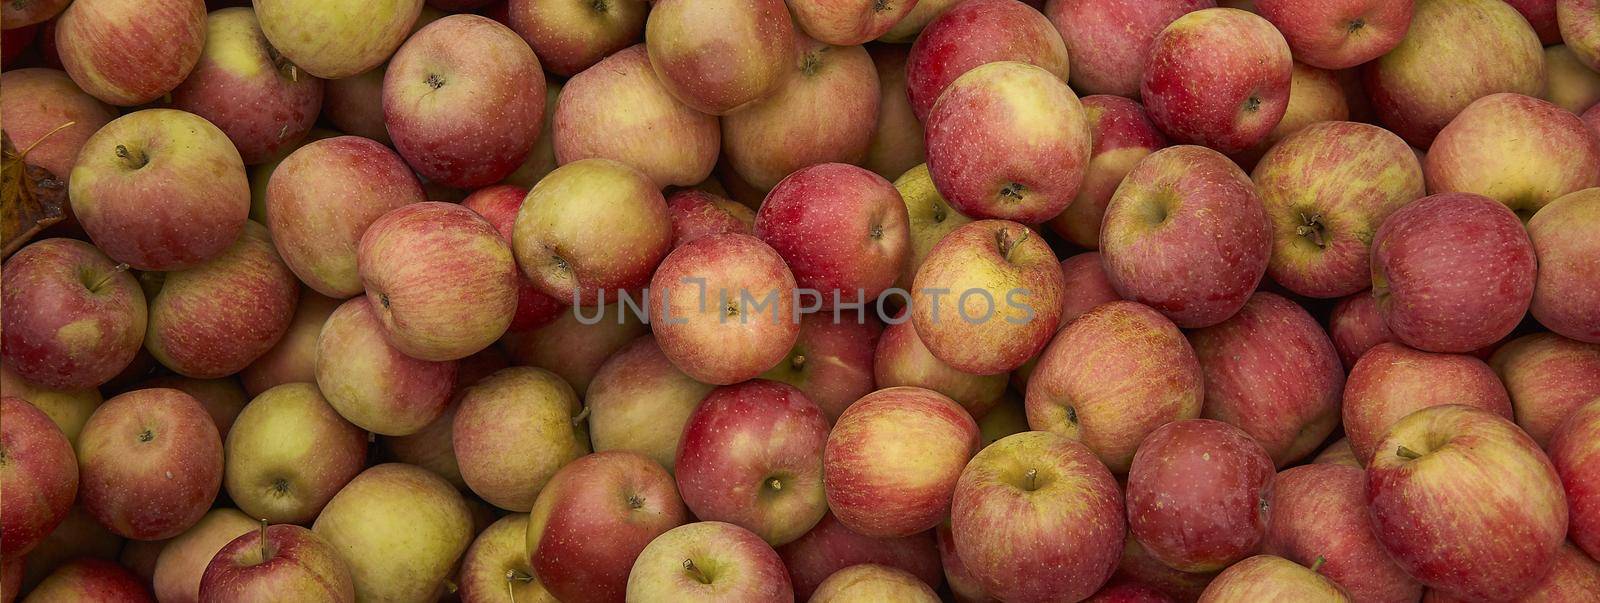 Apples texture detail, banner image with copy space